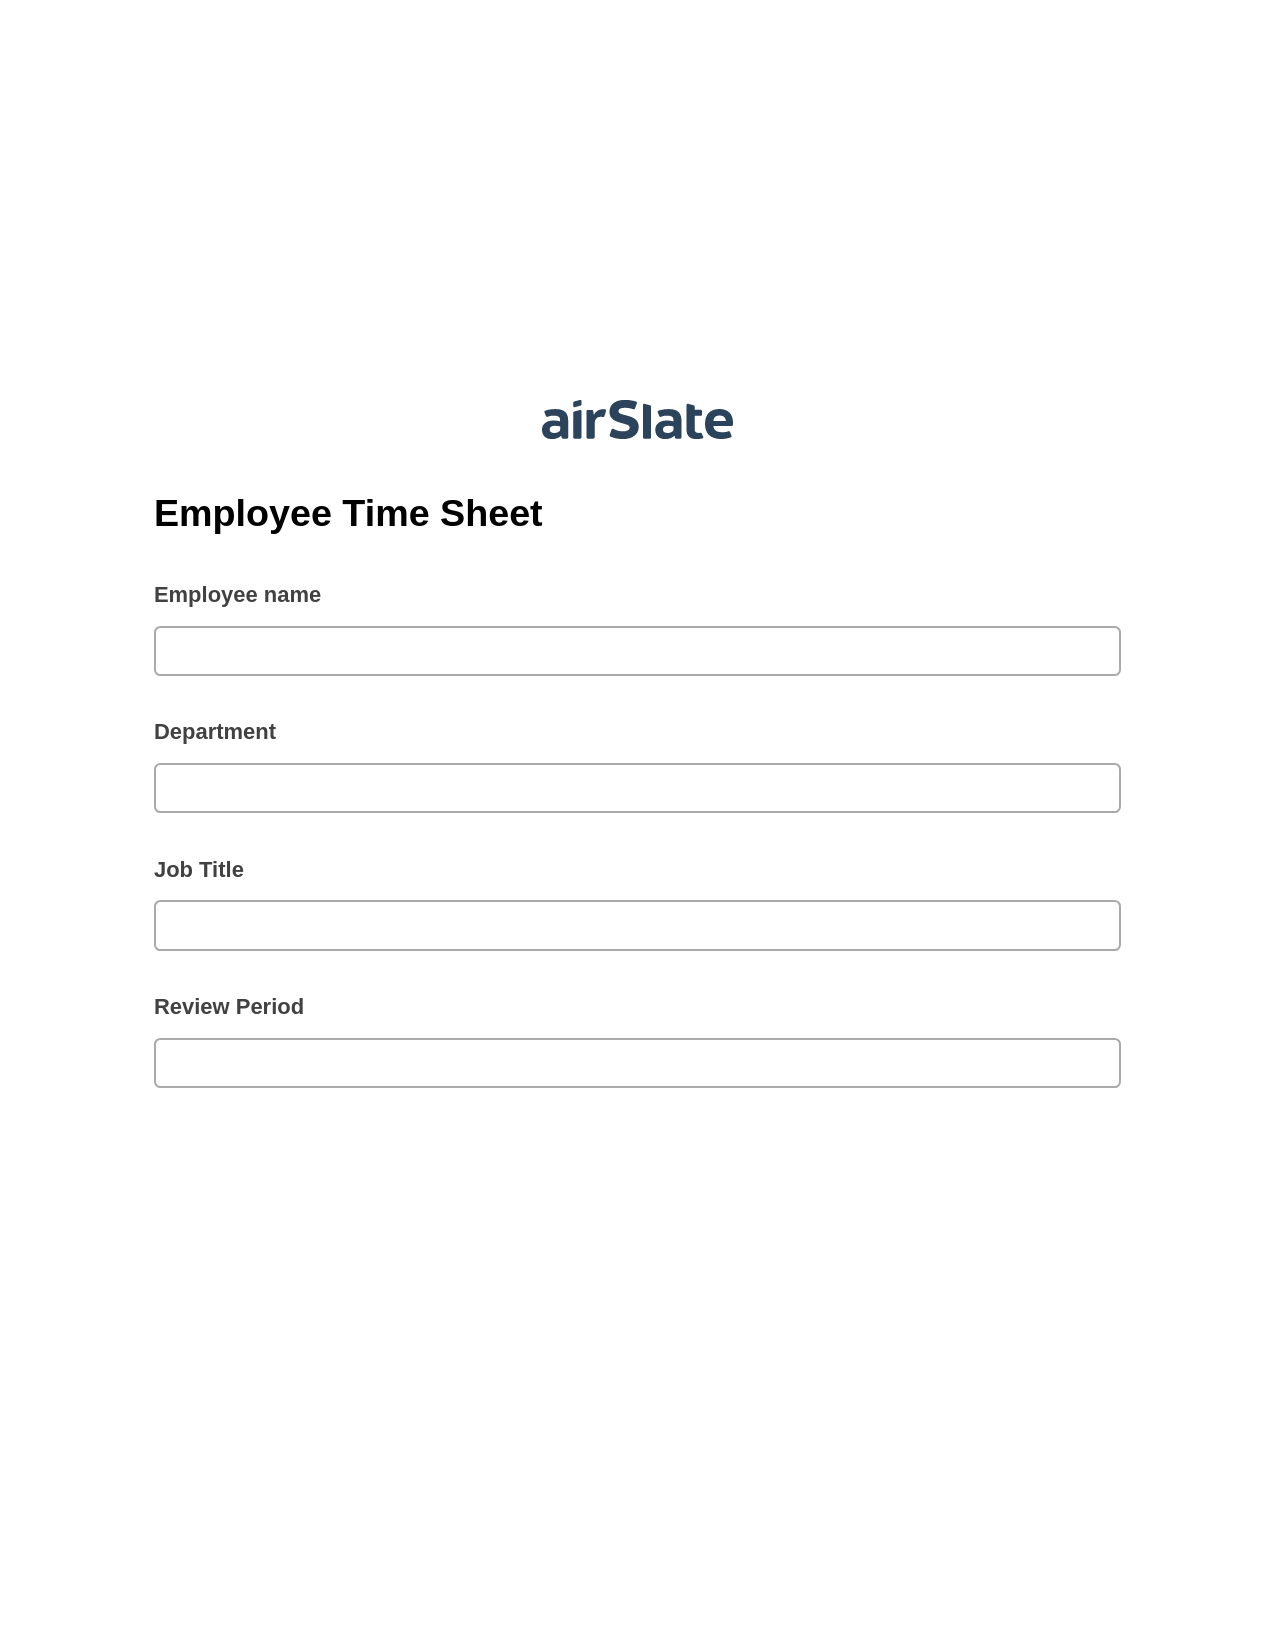 Multirole Employee Time Sheet Pre-fill Document Bot, Mailchimp add recipient to audience Bot, Post-finish Document Bot